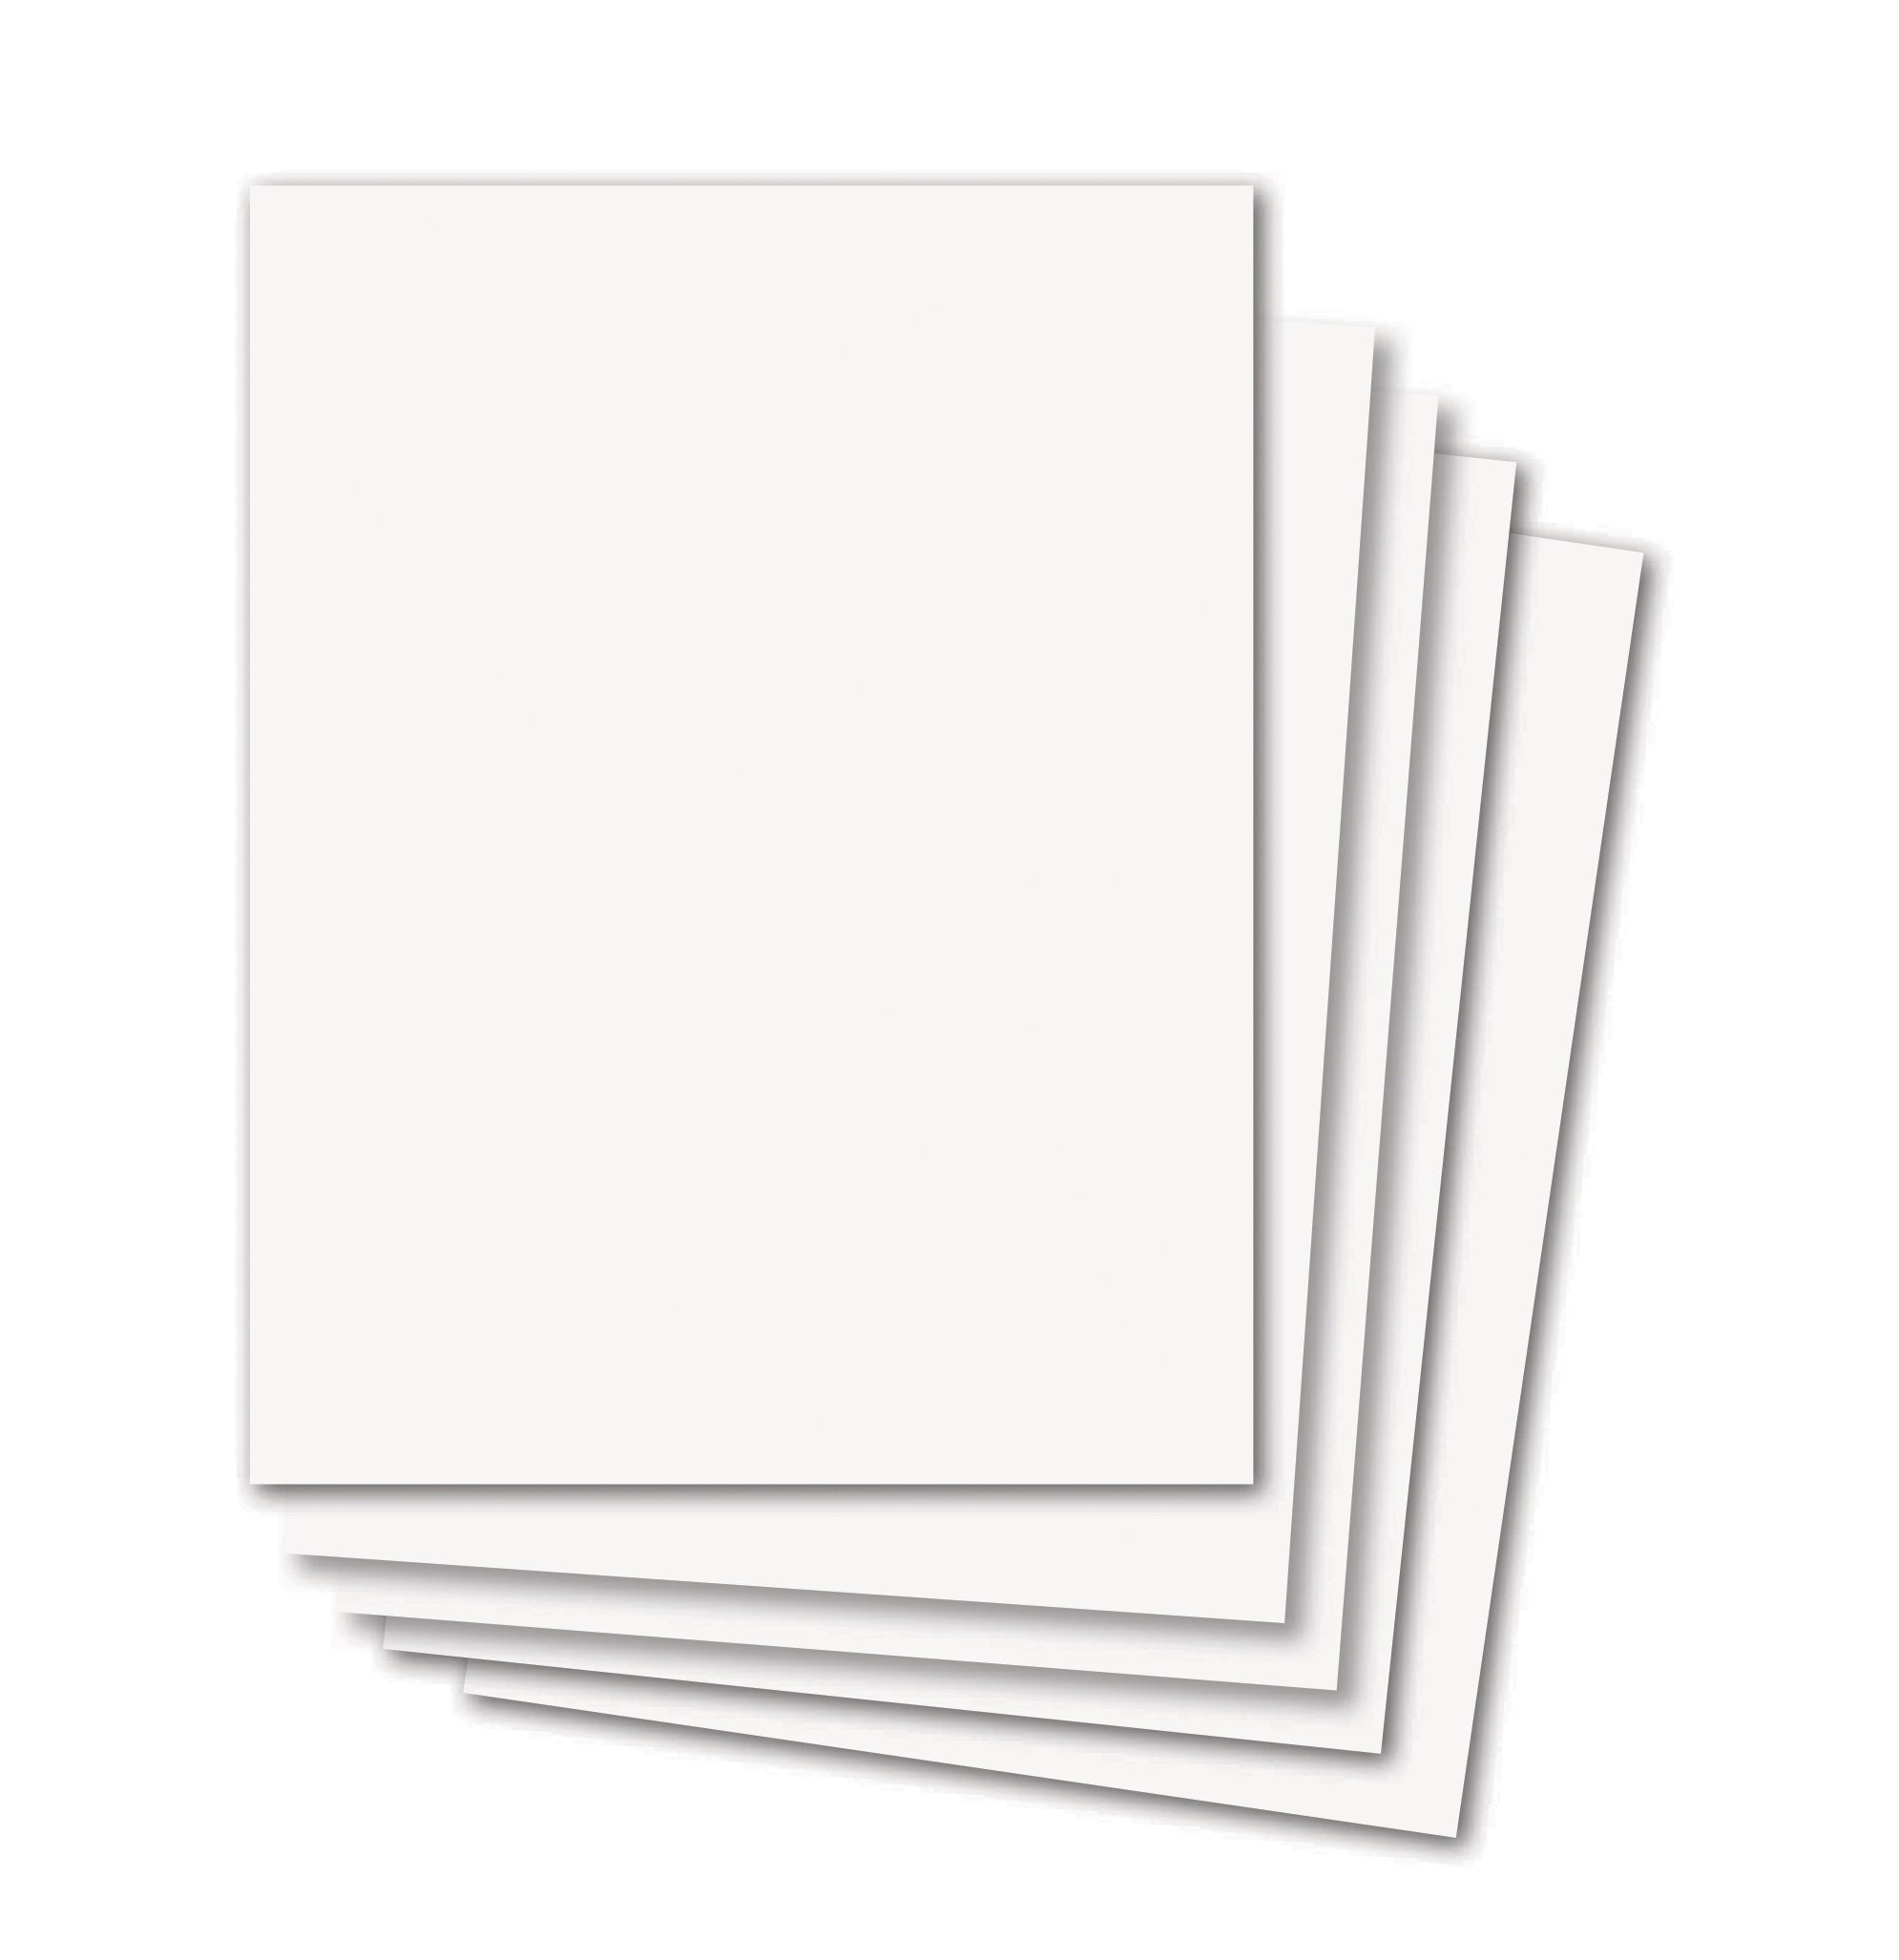 With Black Lines White 10 Pads 3 x 5 Memo Pads 50 Sheets Per Pad